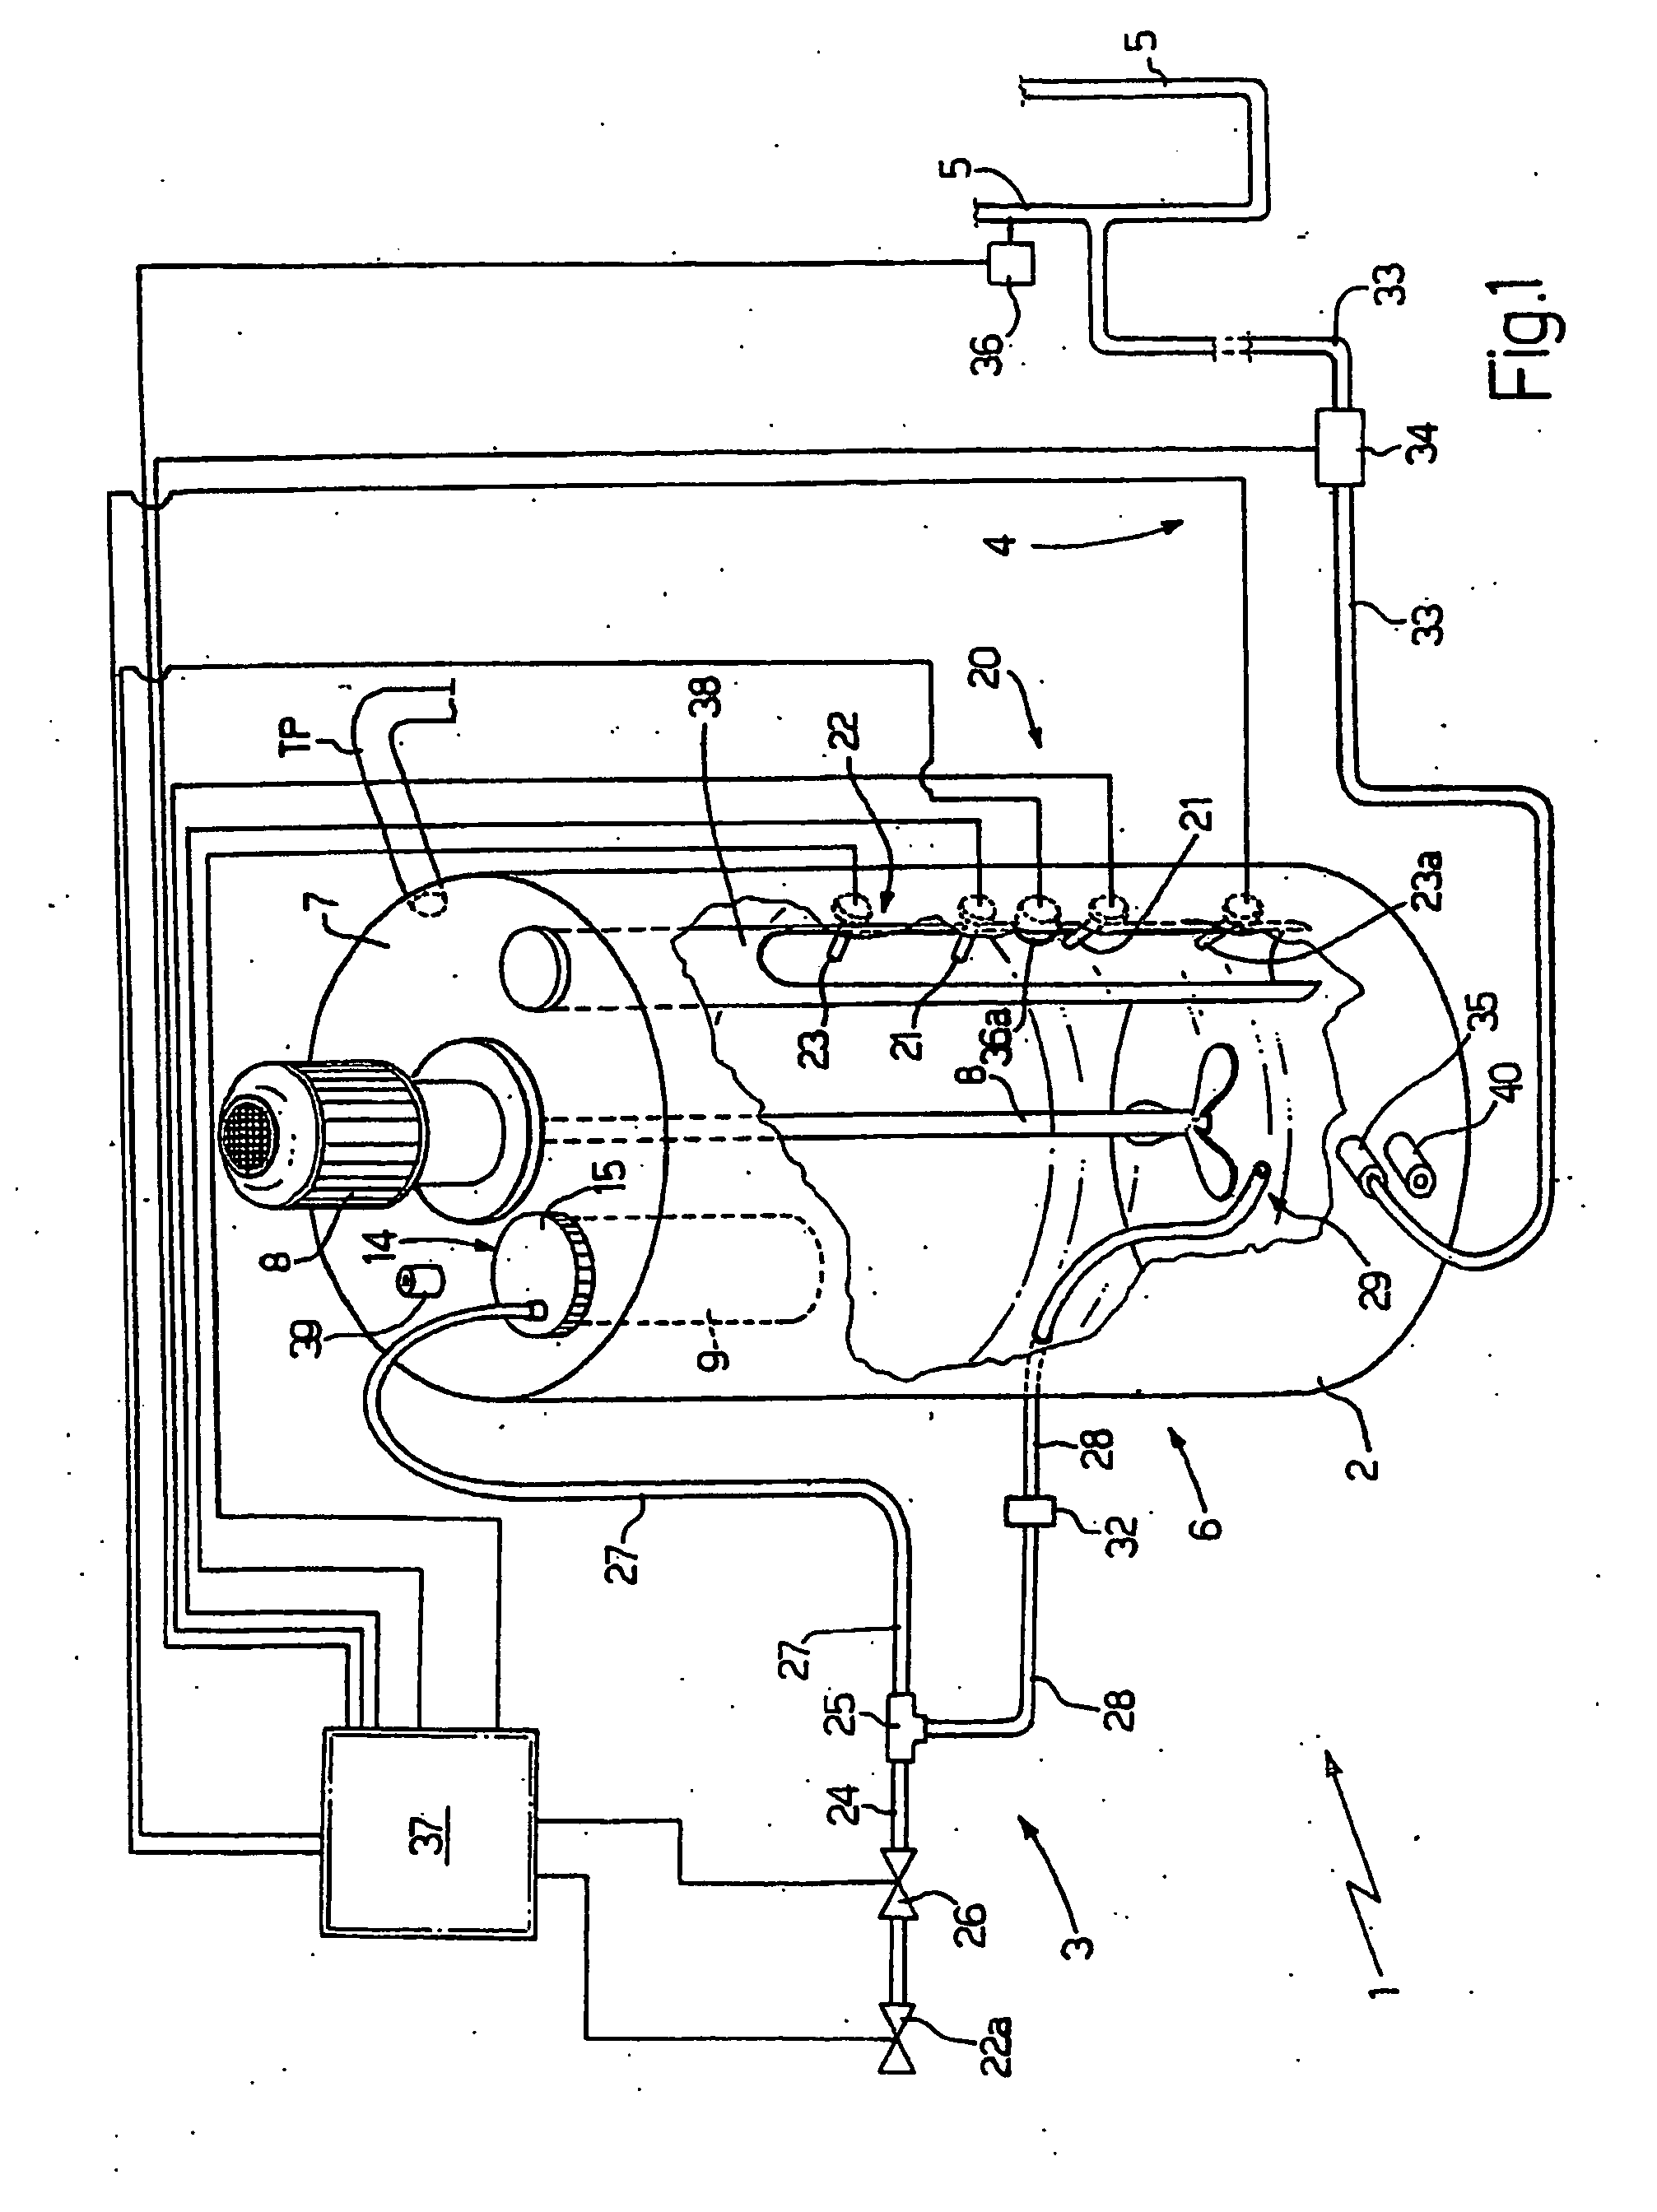 Device for dissolving solid substances in water